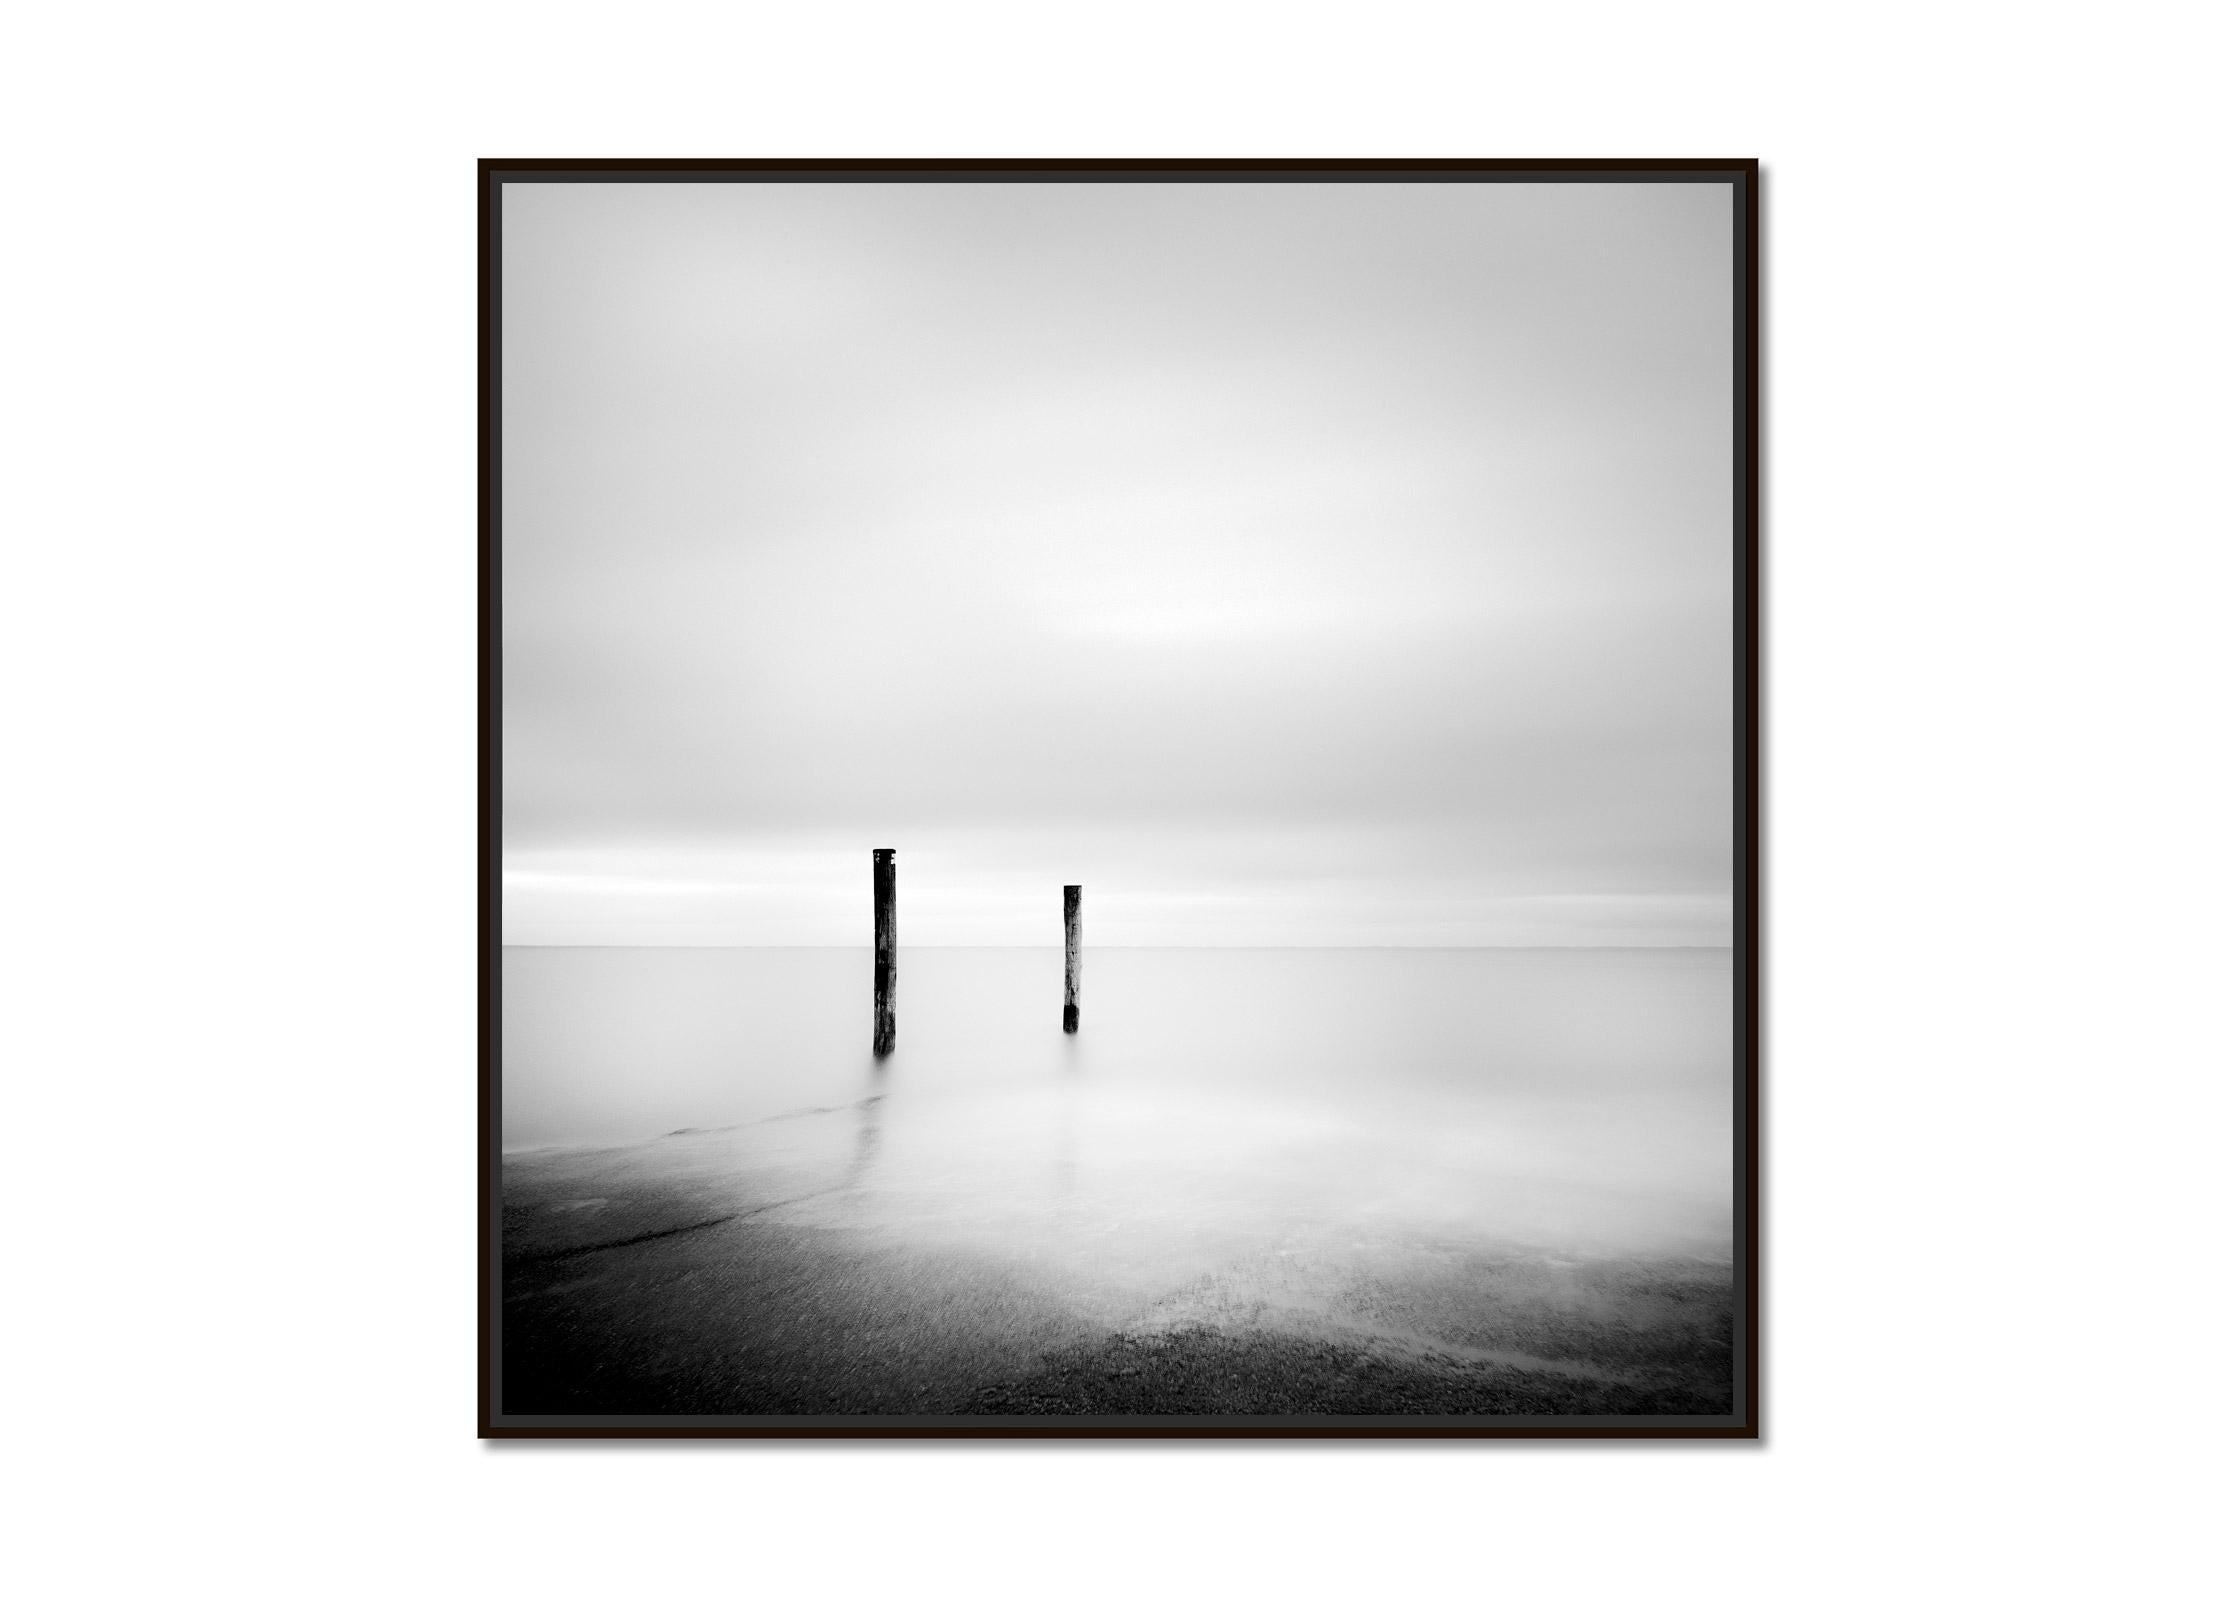 Two Wooden Stakes, Sylt, Germany, black and white long exposure art photography - Photograph by Gerald Berghammer